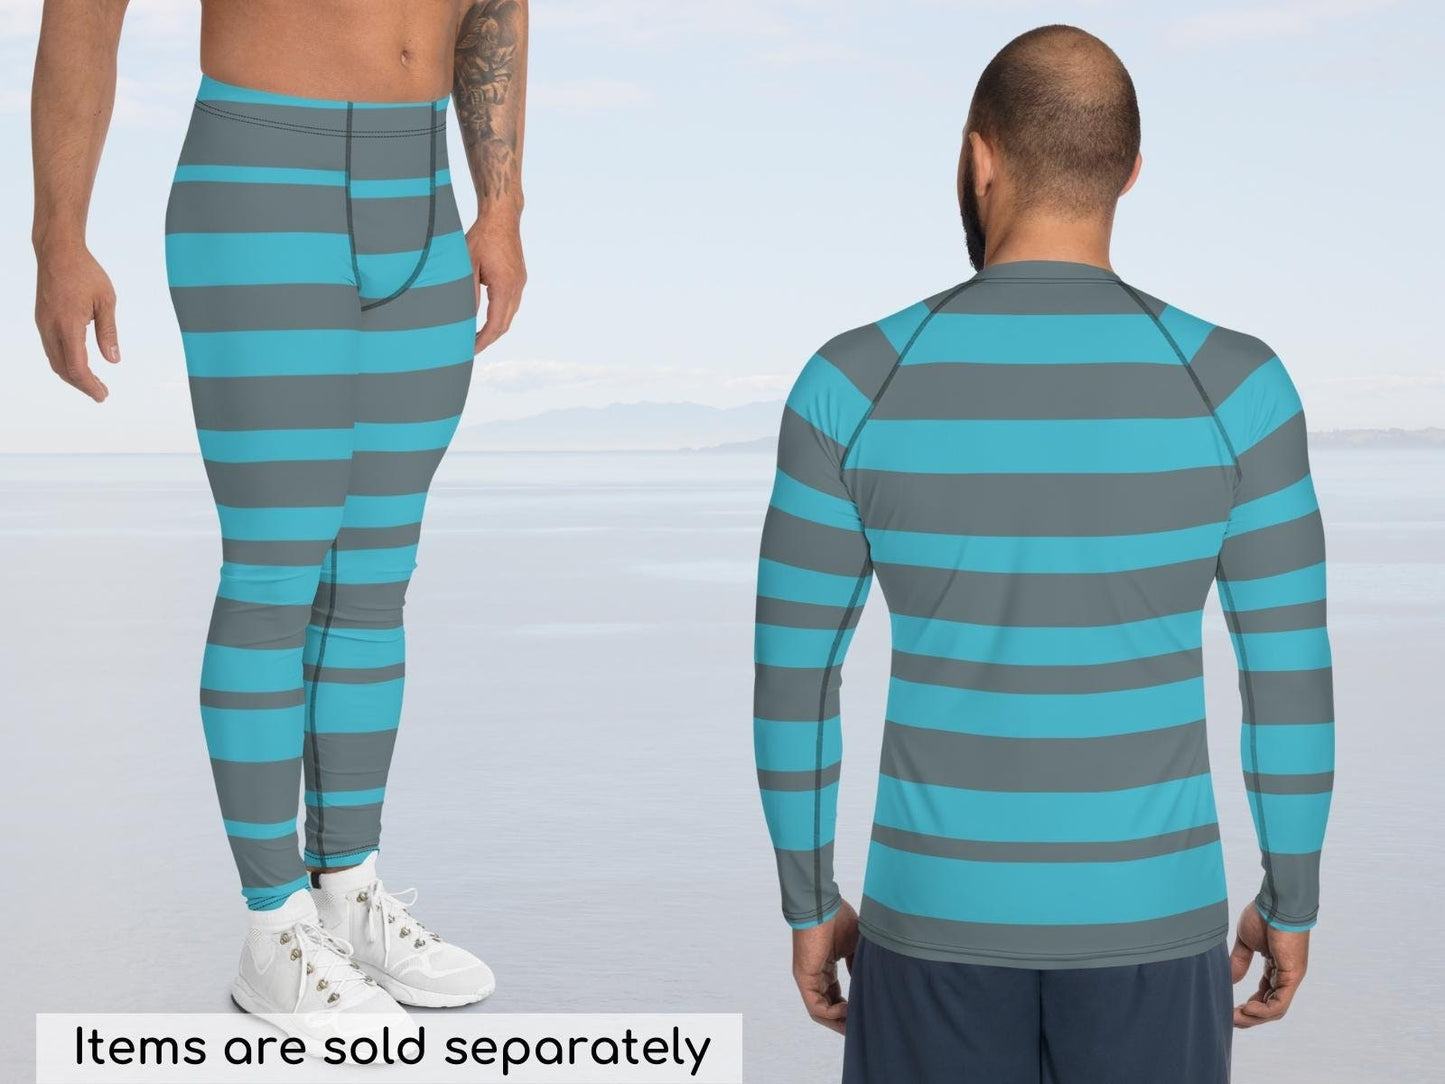 Blue Cheshire Cat Men's Rash Guard and Pants, Alice in Wonderland Party, Cosplay, Striped Halloween Costume